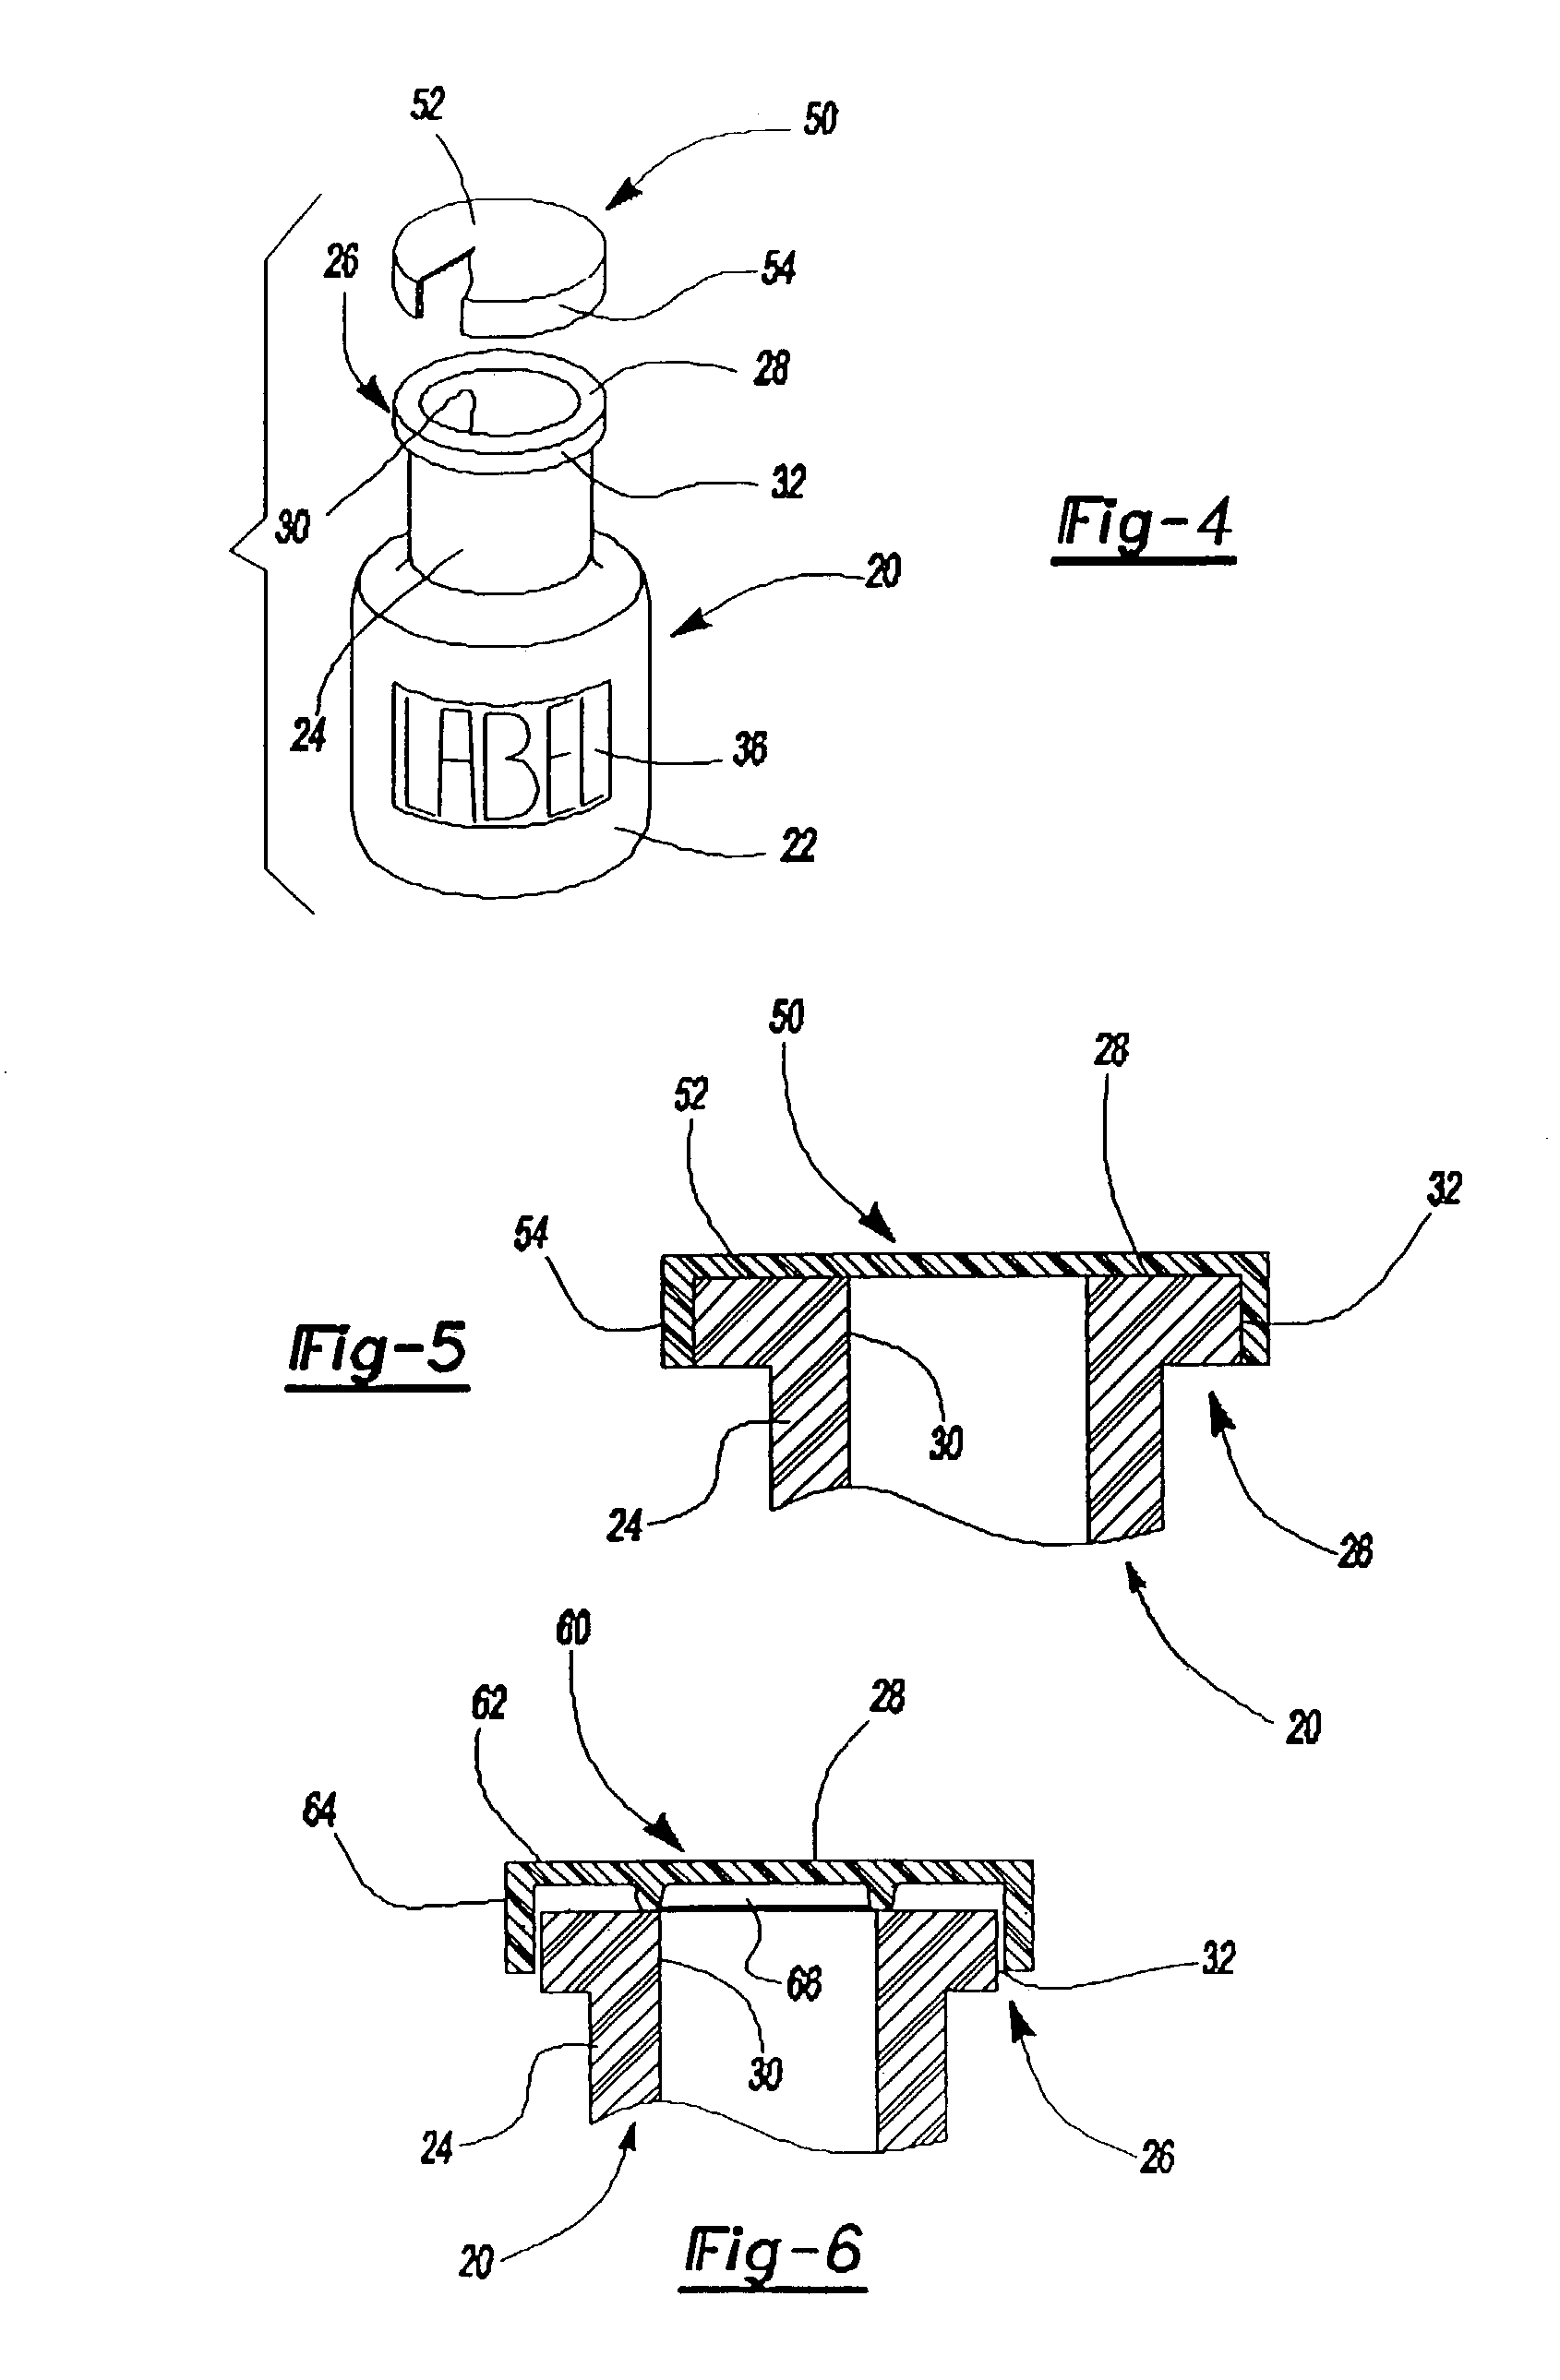 Method of fusing a component to a medical storage or transfer device and container assembly